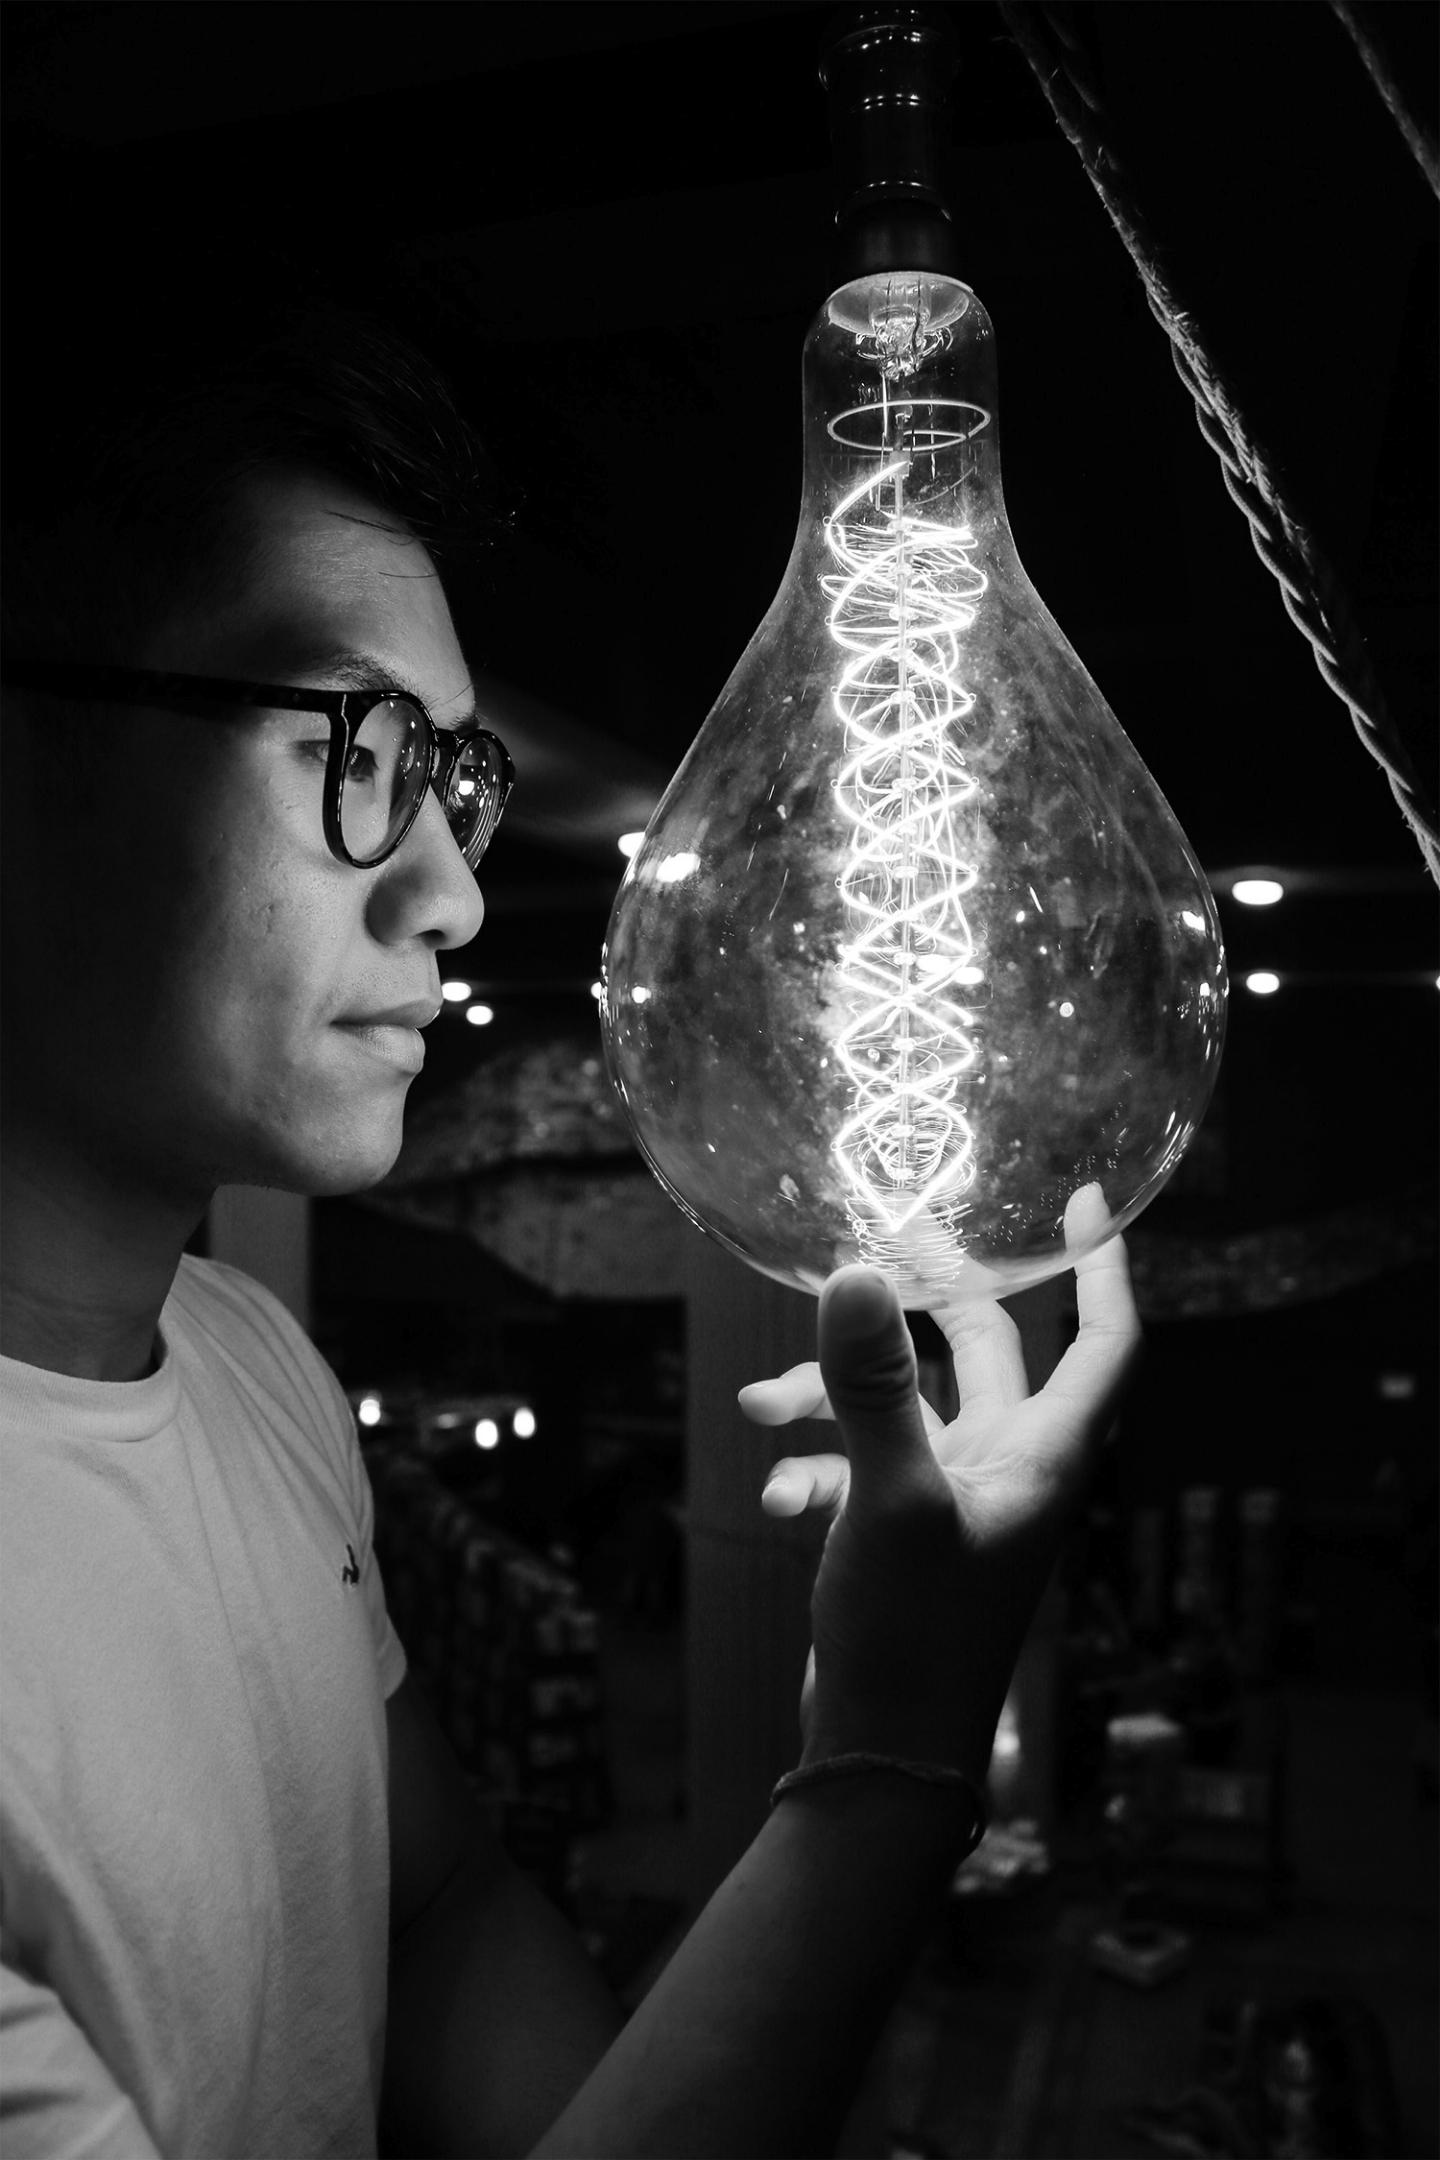 A man closely observing a large lightbulb in a dark studio.